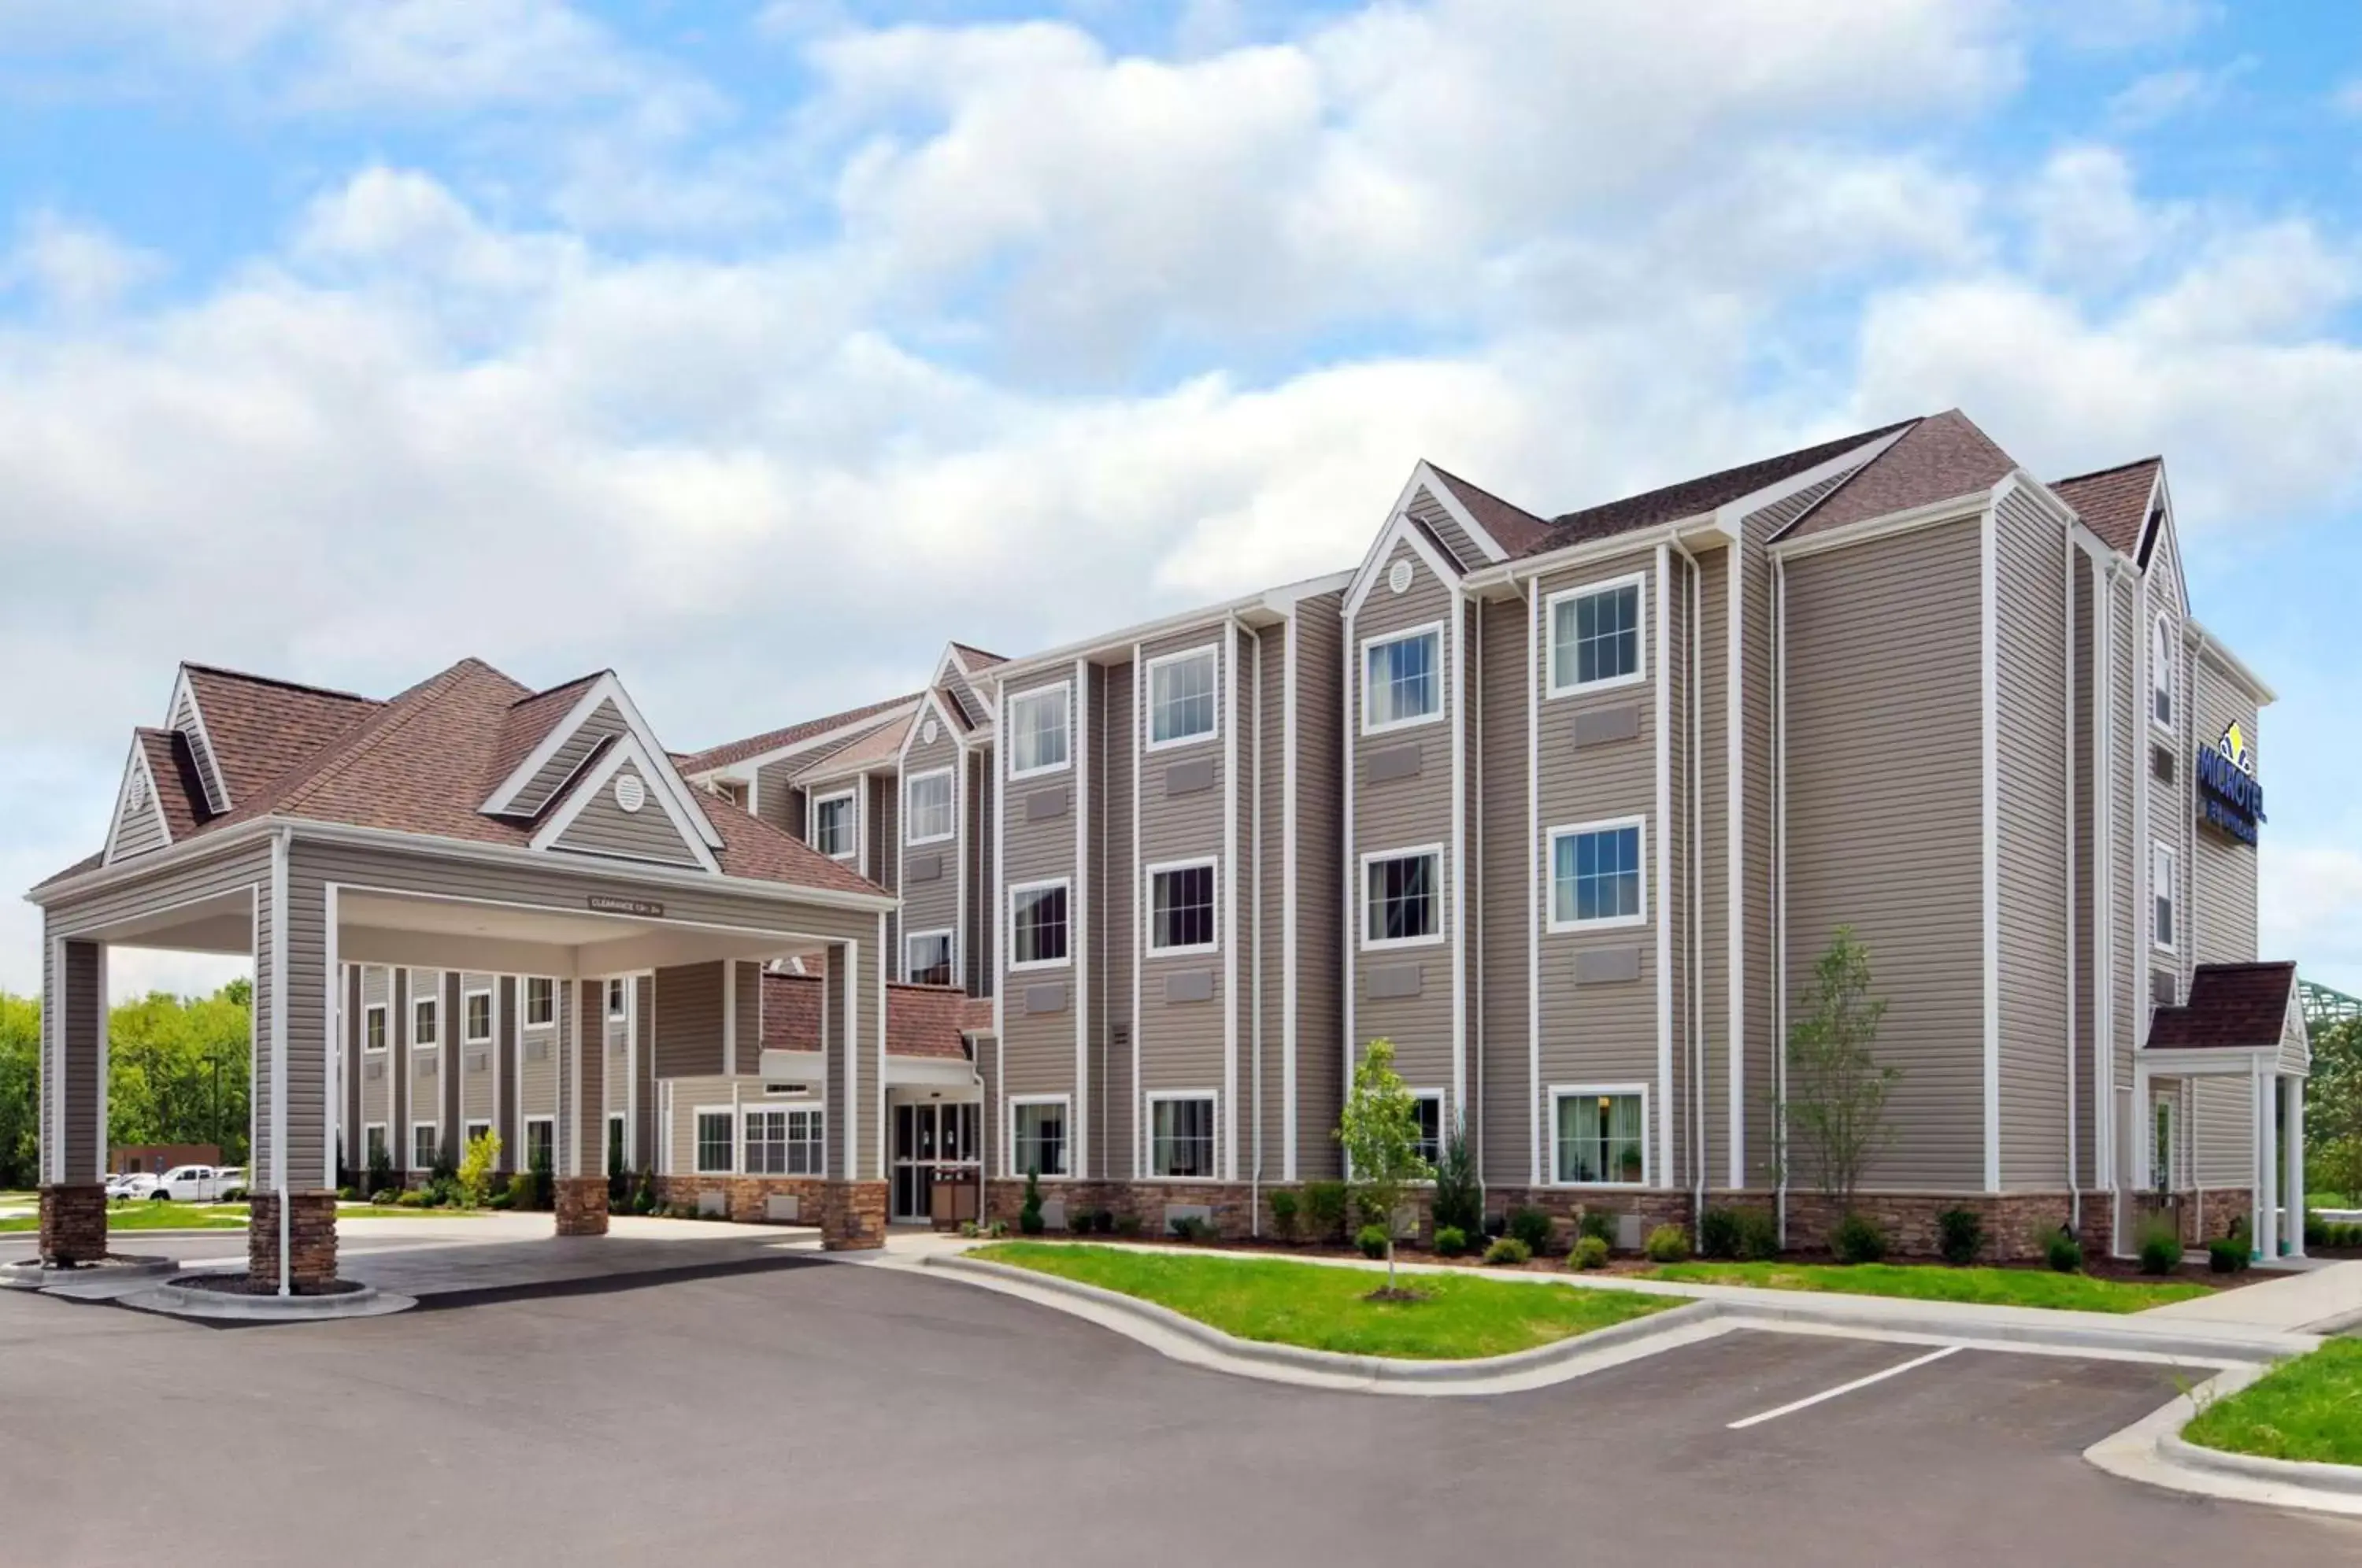 Property building in Microtel Inn & Suites by Wyndham Marietta